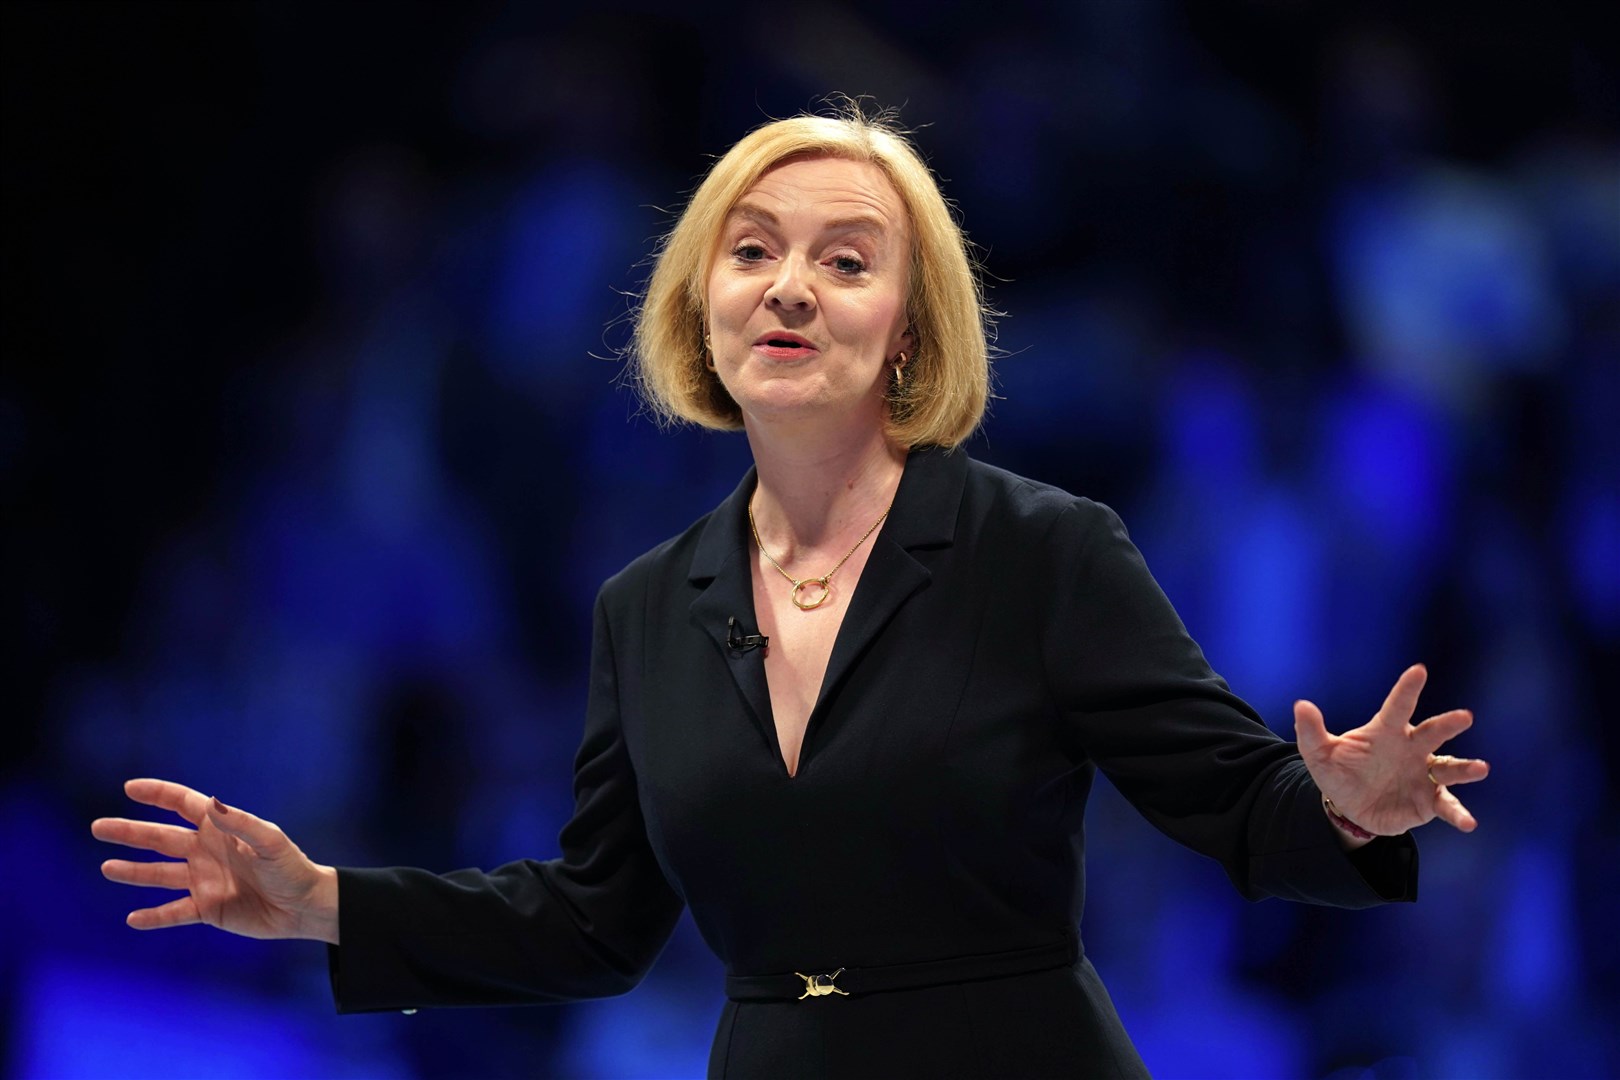 Liz Truss speaking during a hustings event at the NEC in Birmingham (PA)